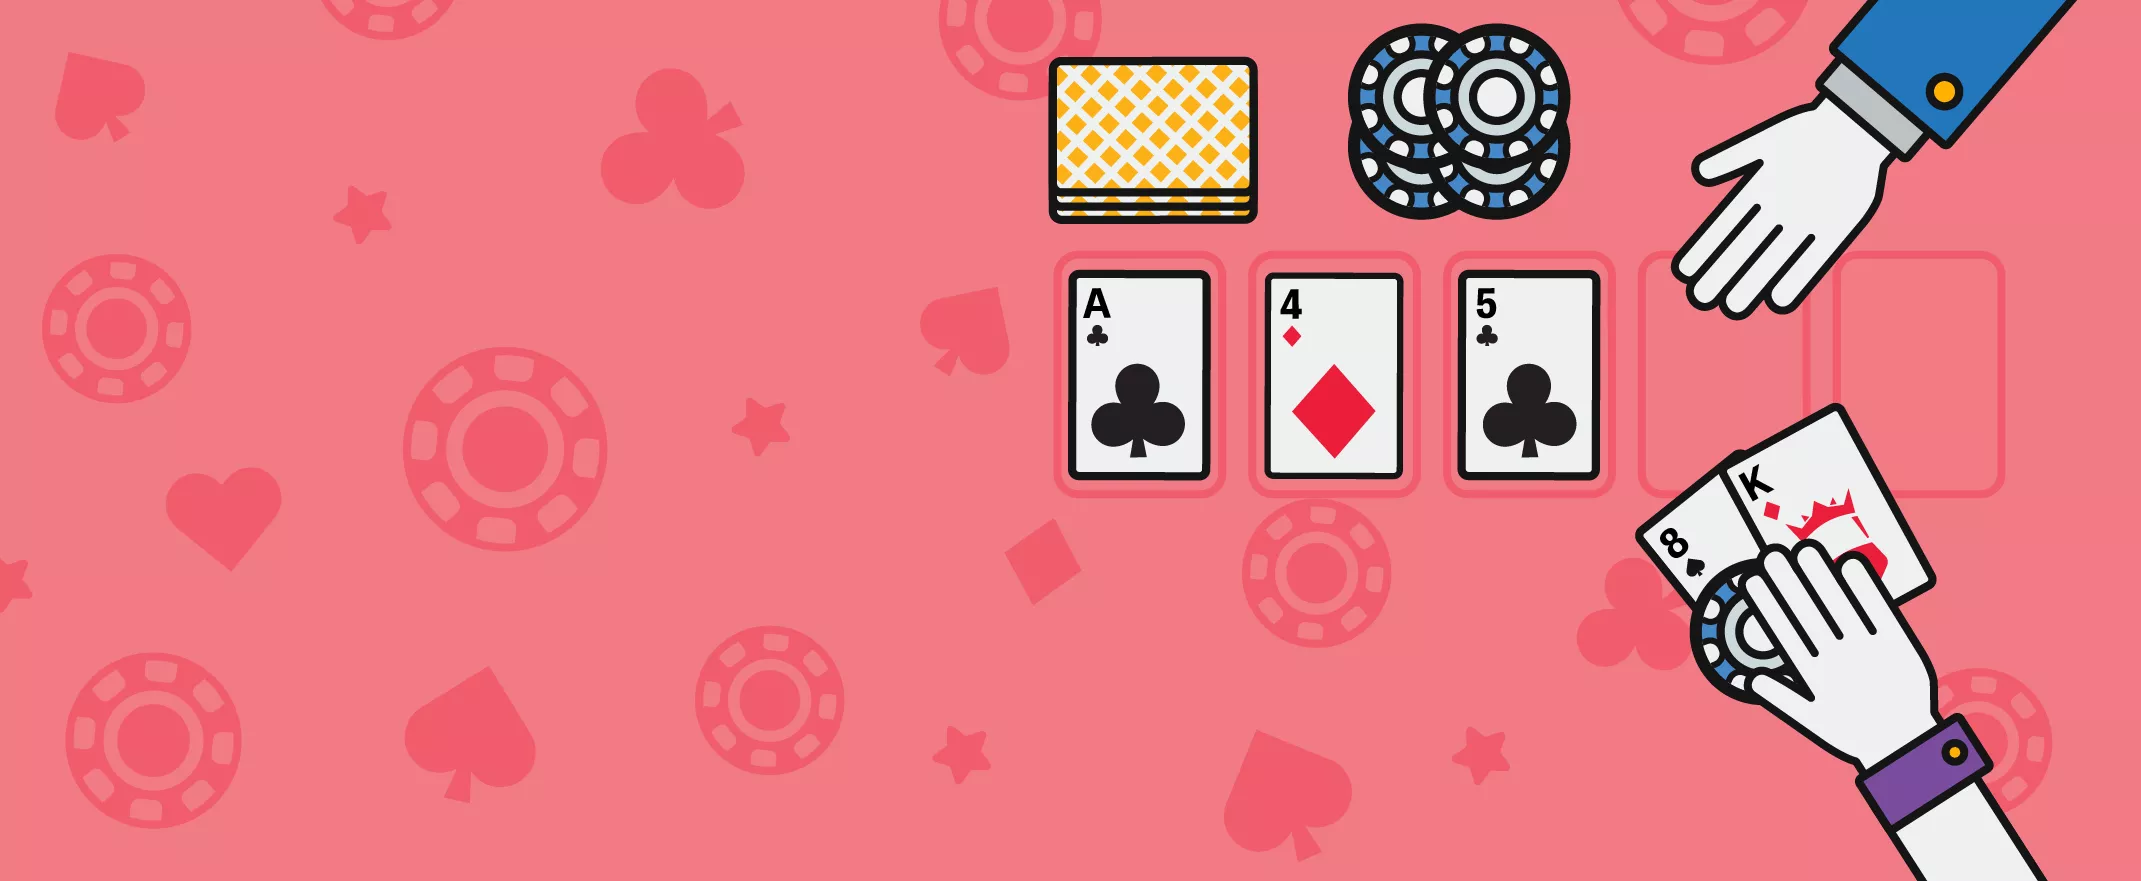 Advanced poker strategies - To show your cards or not